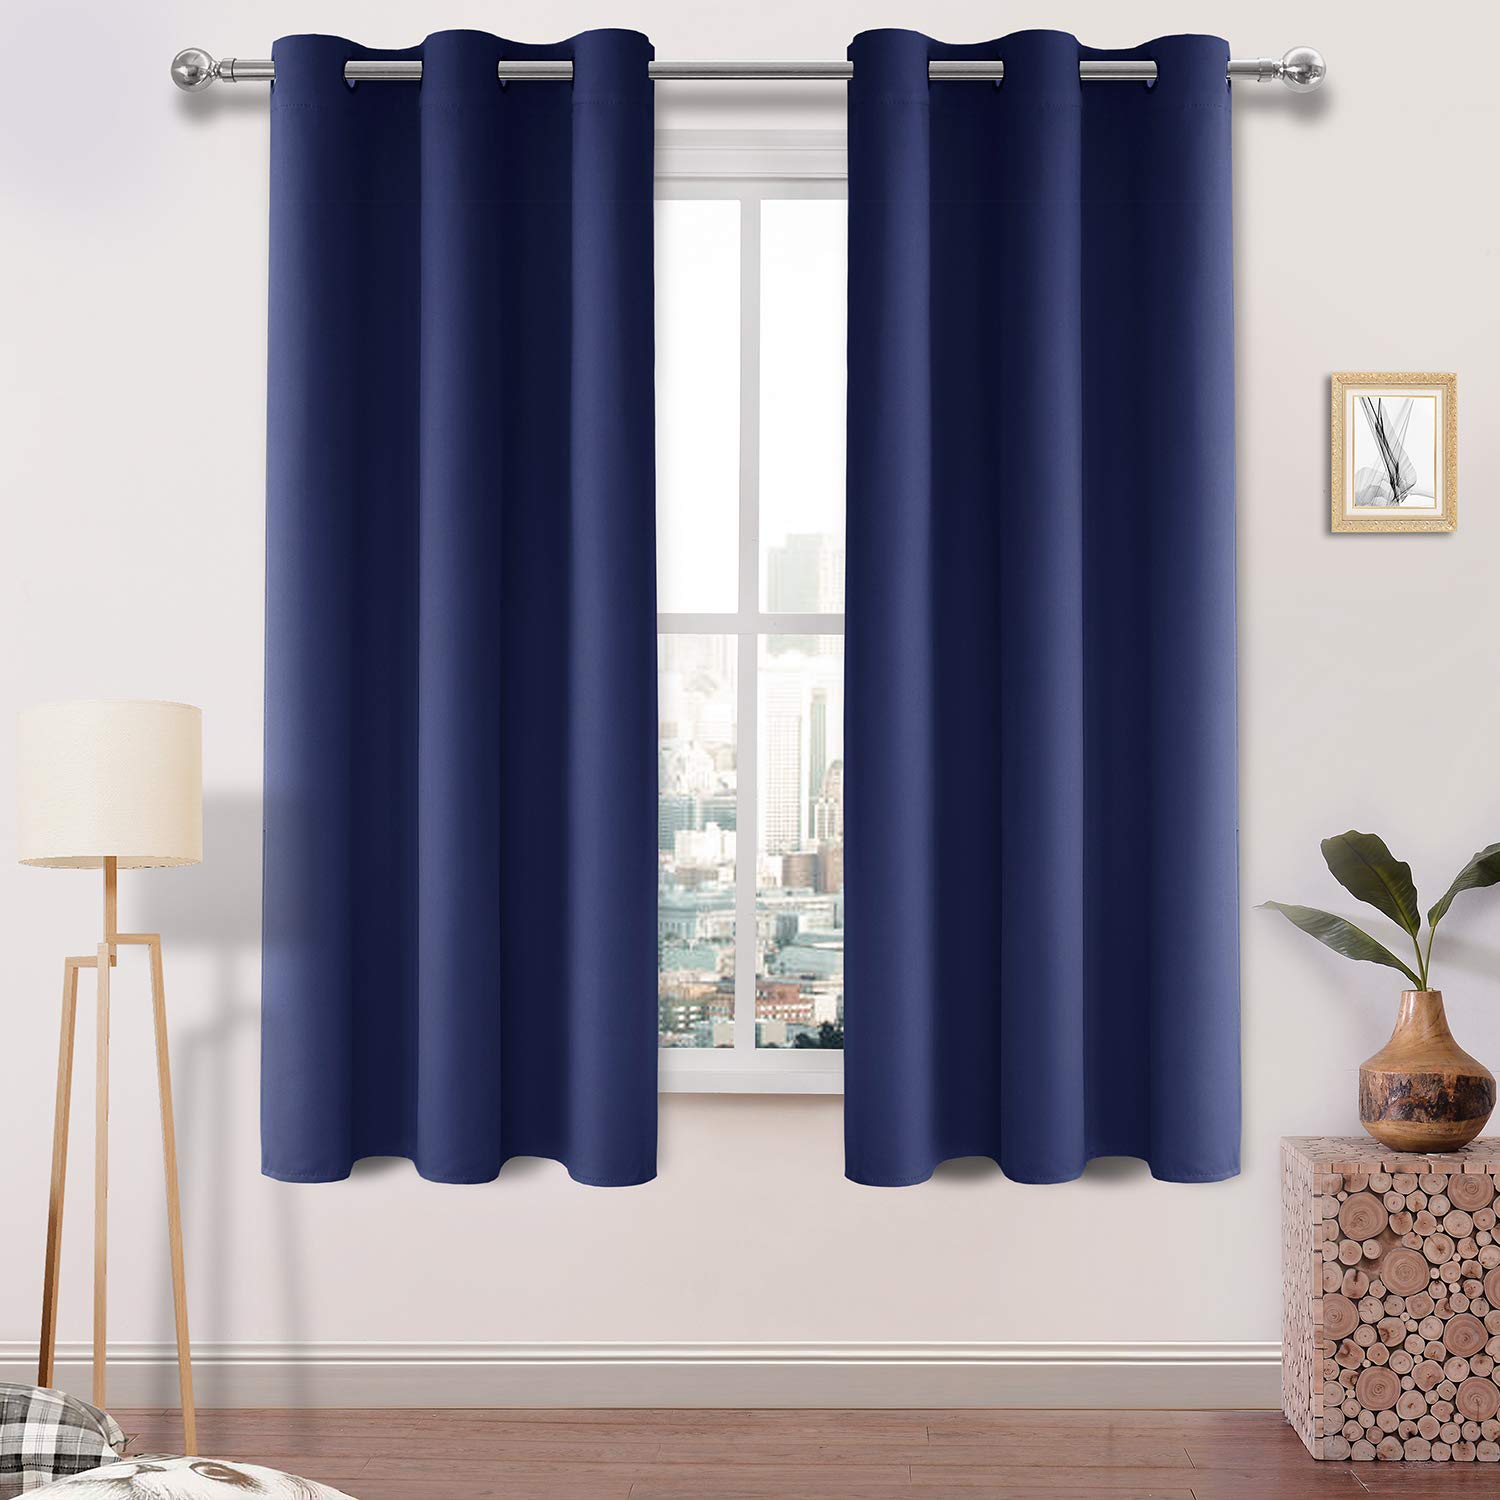 DWcN Blackout curtains - Room Darkening Thermal Insulated Kitchen and Bedroom curtains 38 x 72 inches Long, Set of 2 Window curt